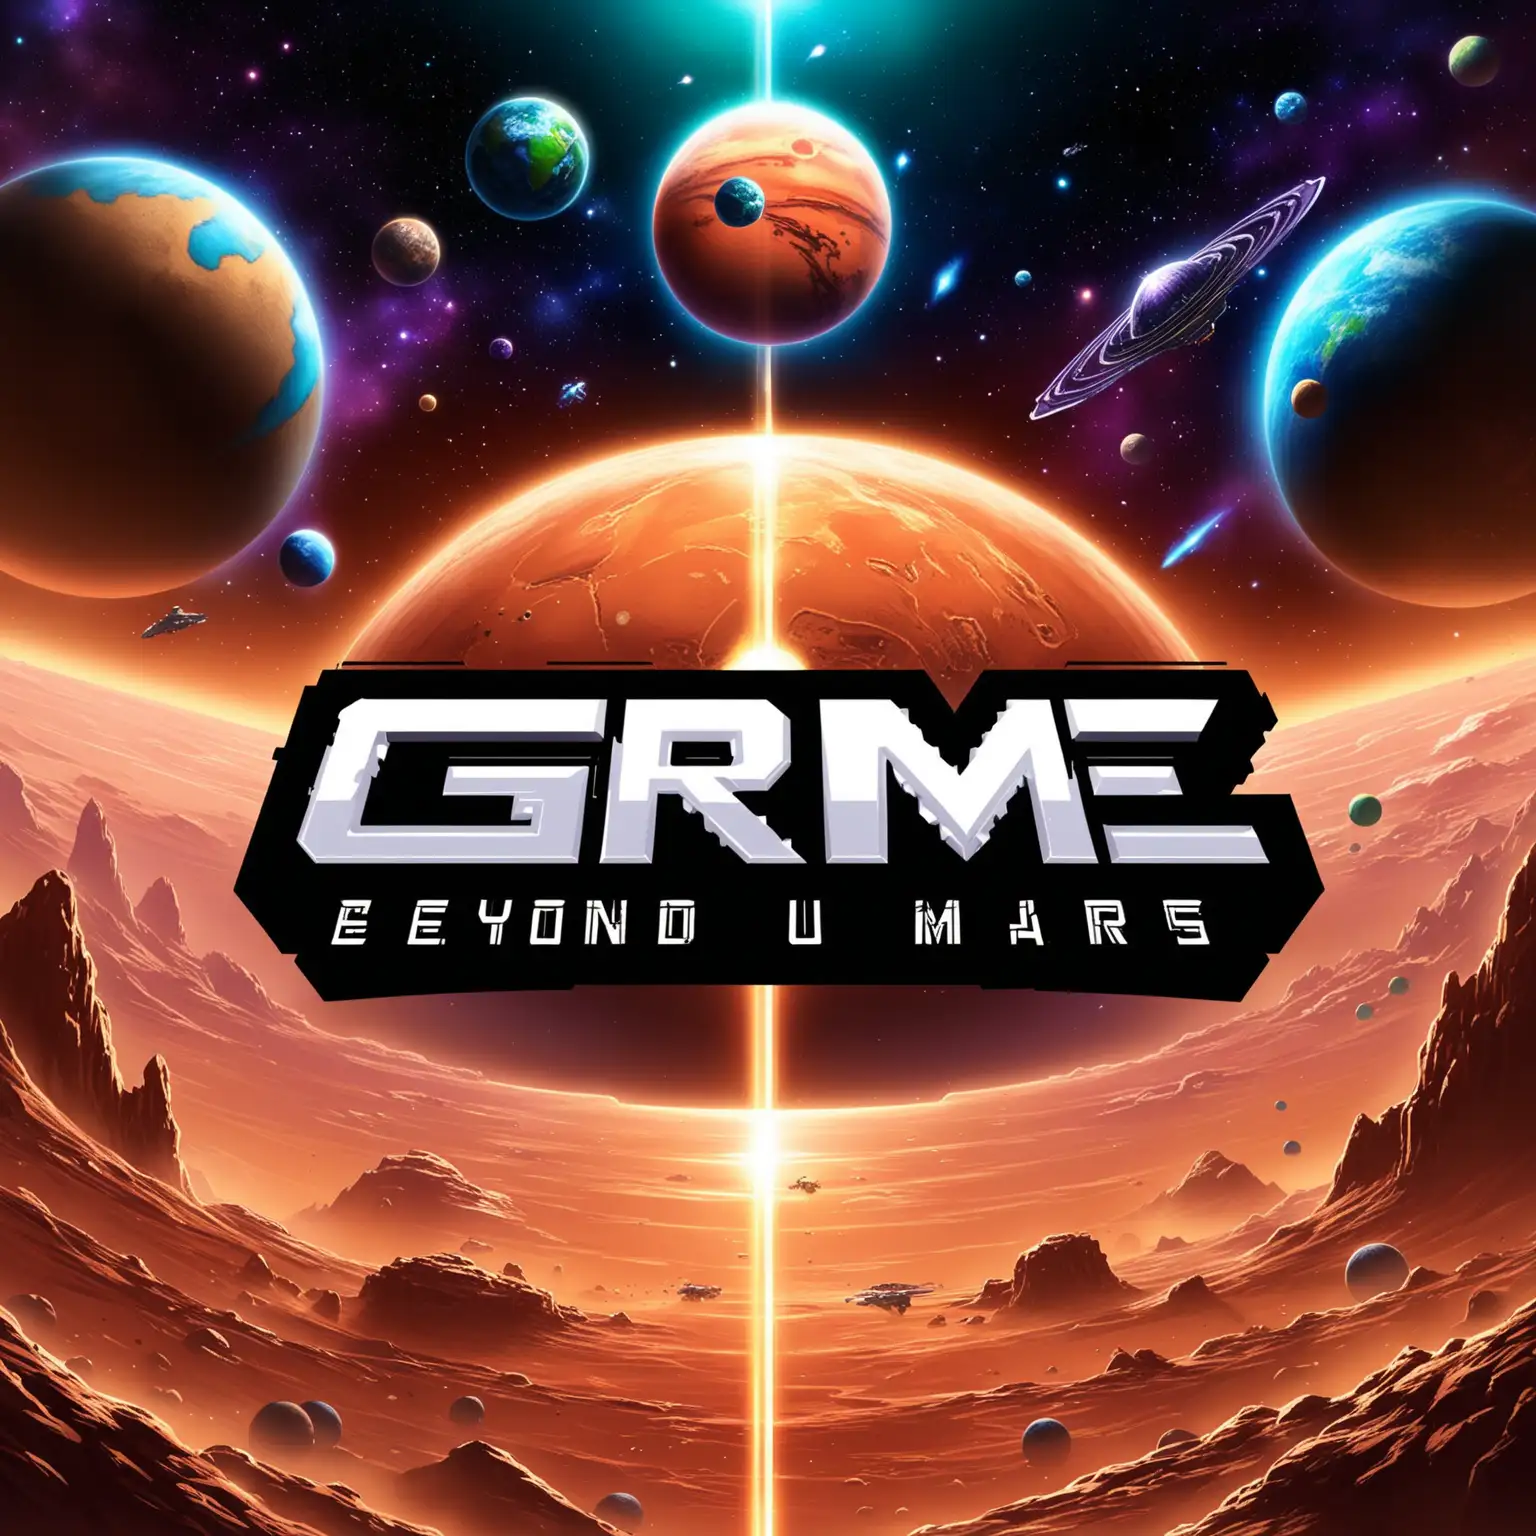 SCI FI VIDEO GAMES COVERS DELIVER US MARS, ENCASED, BEYOND CONTACT ART STYLE WITH LETTERS "GRME" ONTOP AND THE LETTERS "WRLD" UNDERNEATH FPS RPG VIDEO GAME LOGO TEMPLATE, STARCRAFT, PLANET WITH LETTERS "GRME" ON TOP AND LETTERS "WRLD" UNDERNEATH